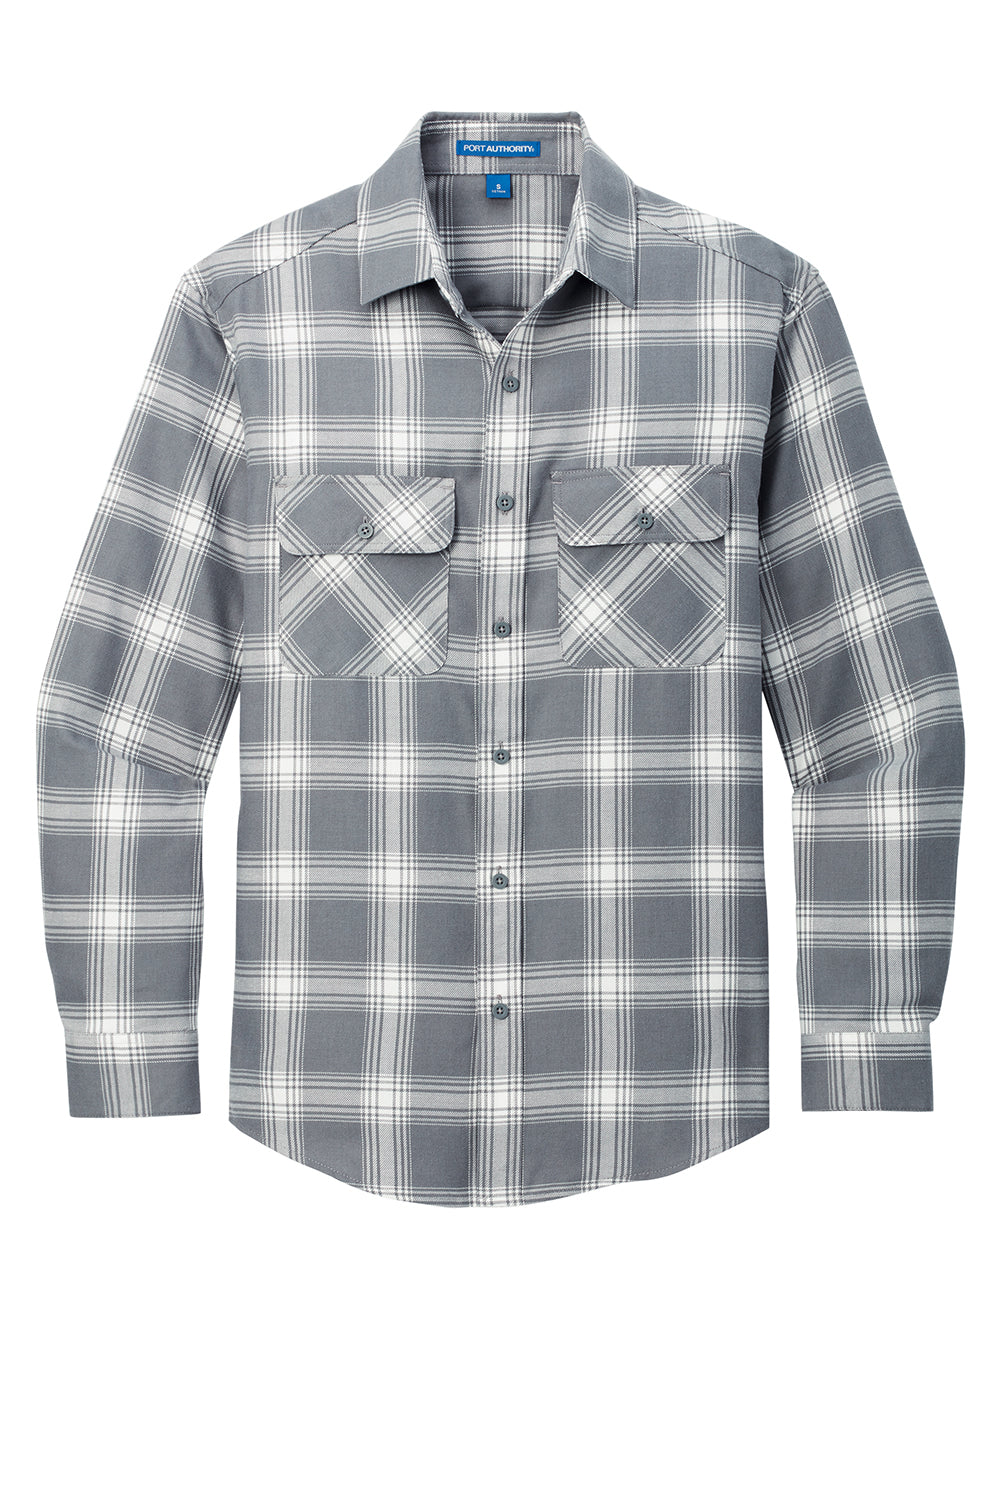 Port Authority W668 Mens Flannel Long Sleeve Button Down Shirt w/ Double Pockets Grey/Cream Plaid Flat Front